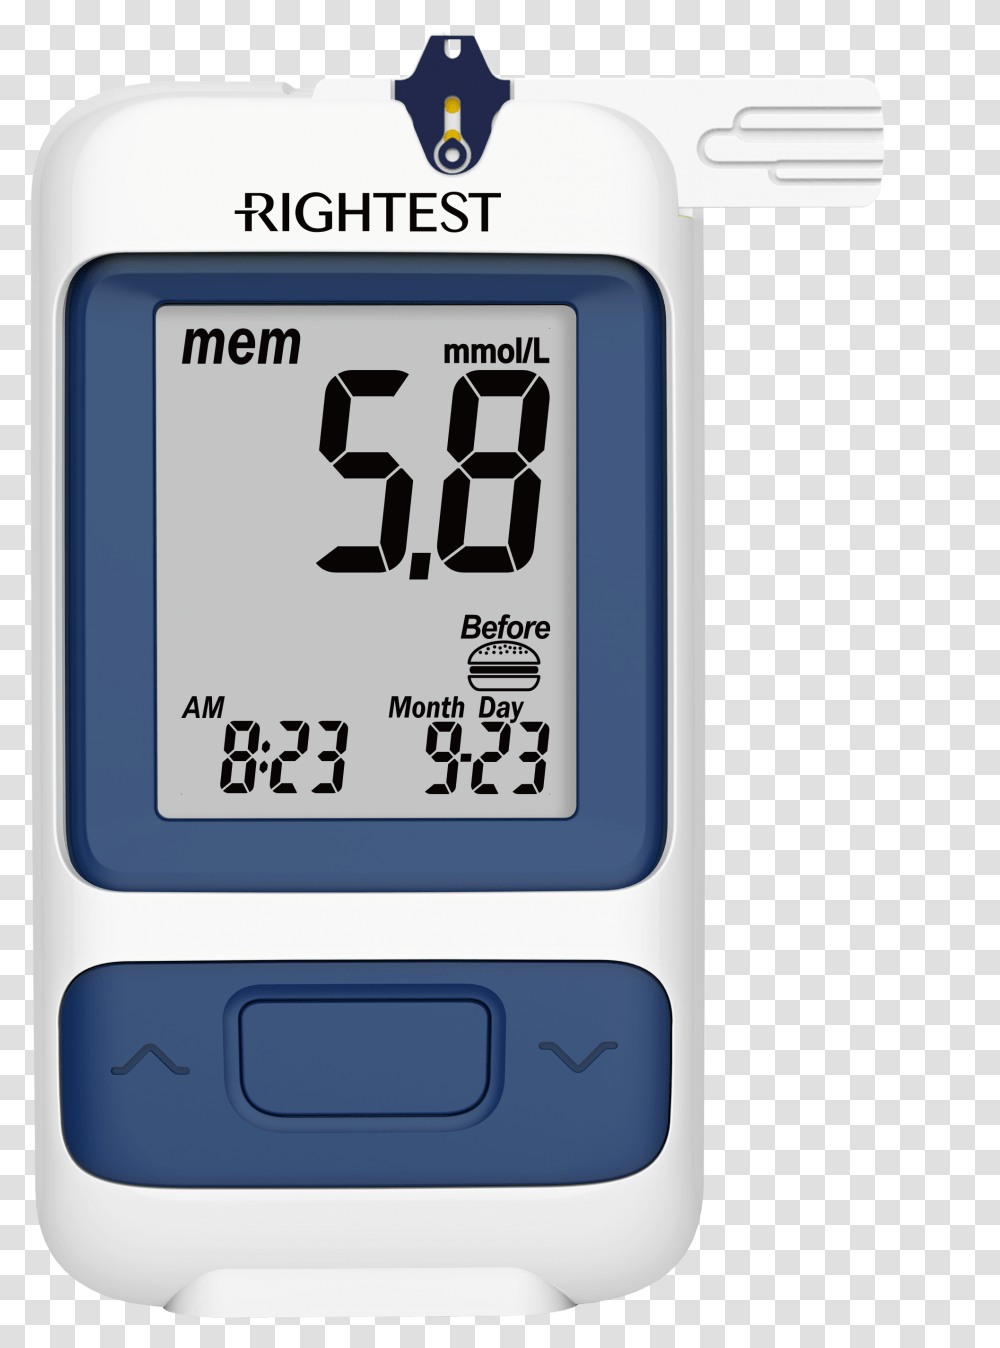 Rightest Gm280 Series Bluetooth Glucose Meter Icon, Mobile Phone, Electronics, Cell Phone, Digital Watch Transparent Png